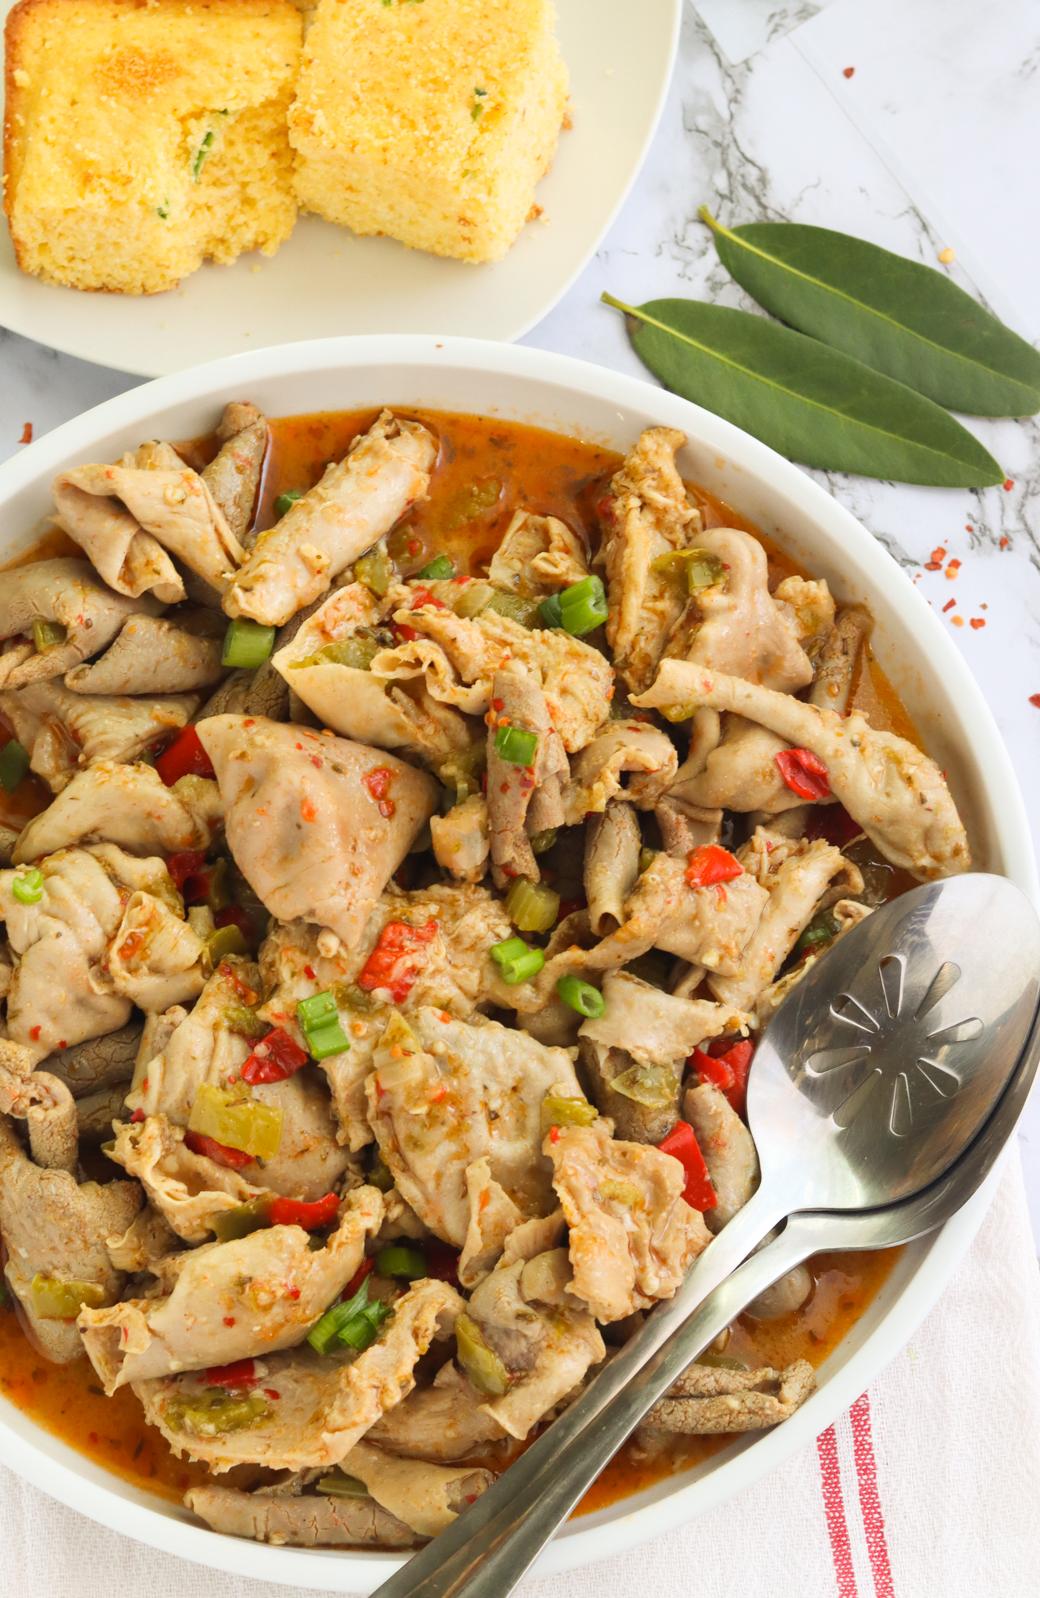  Get ready to take a journey down to the South with these hot and flavorful chitterlings.